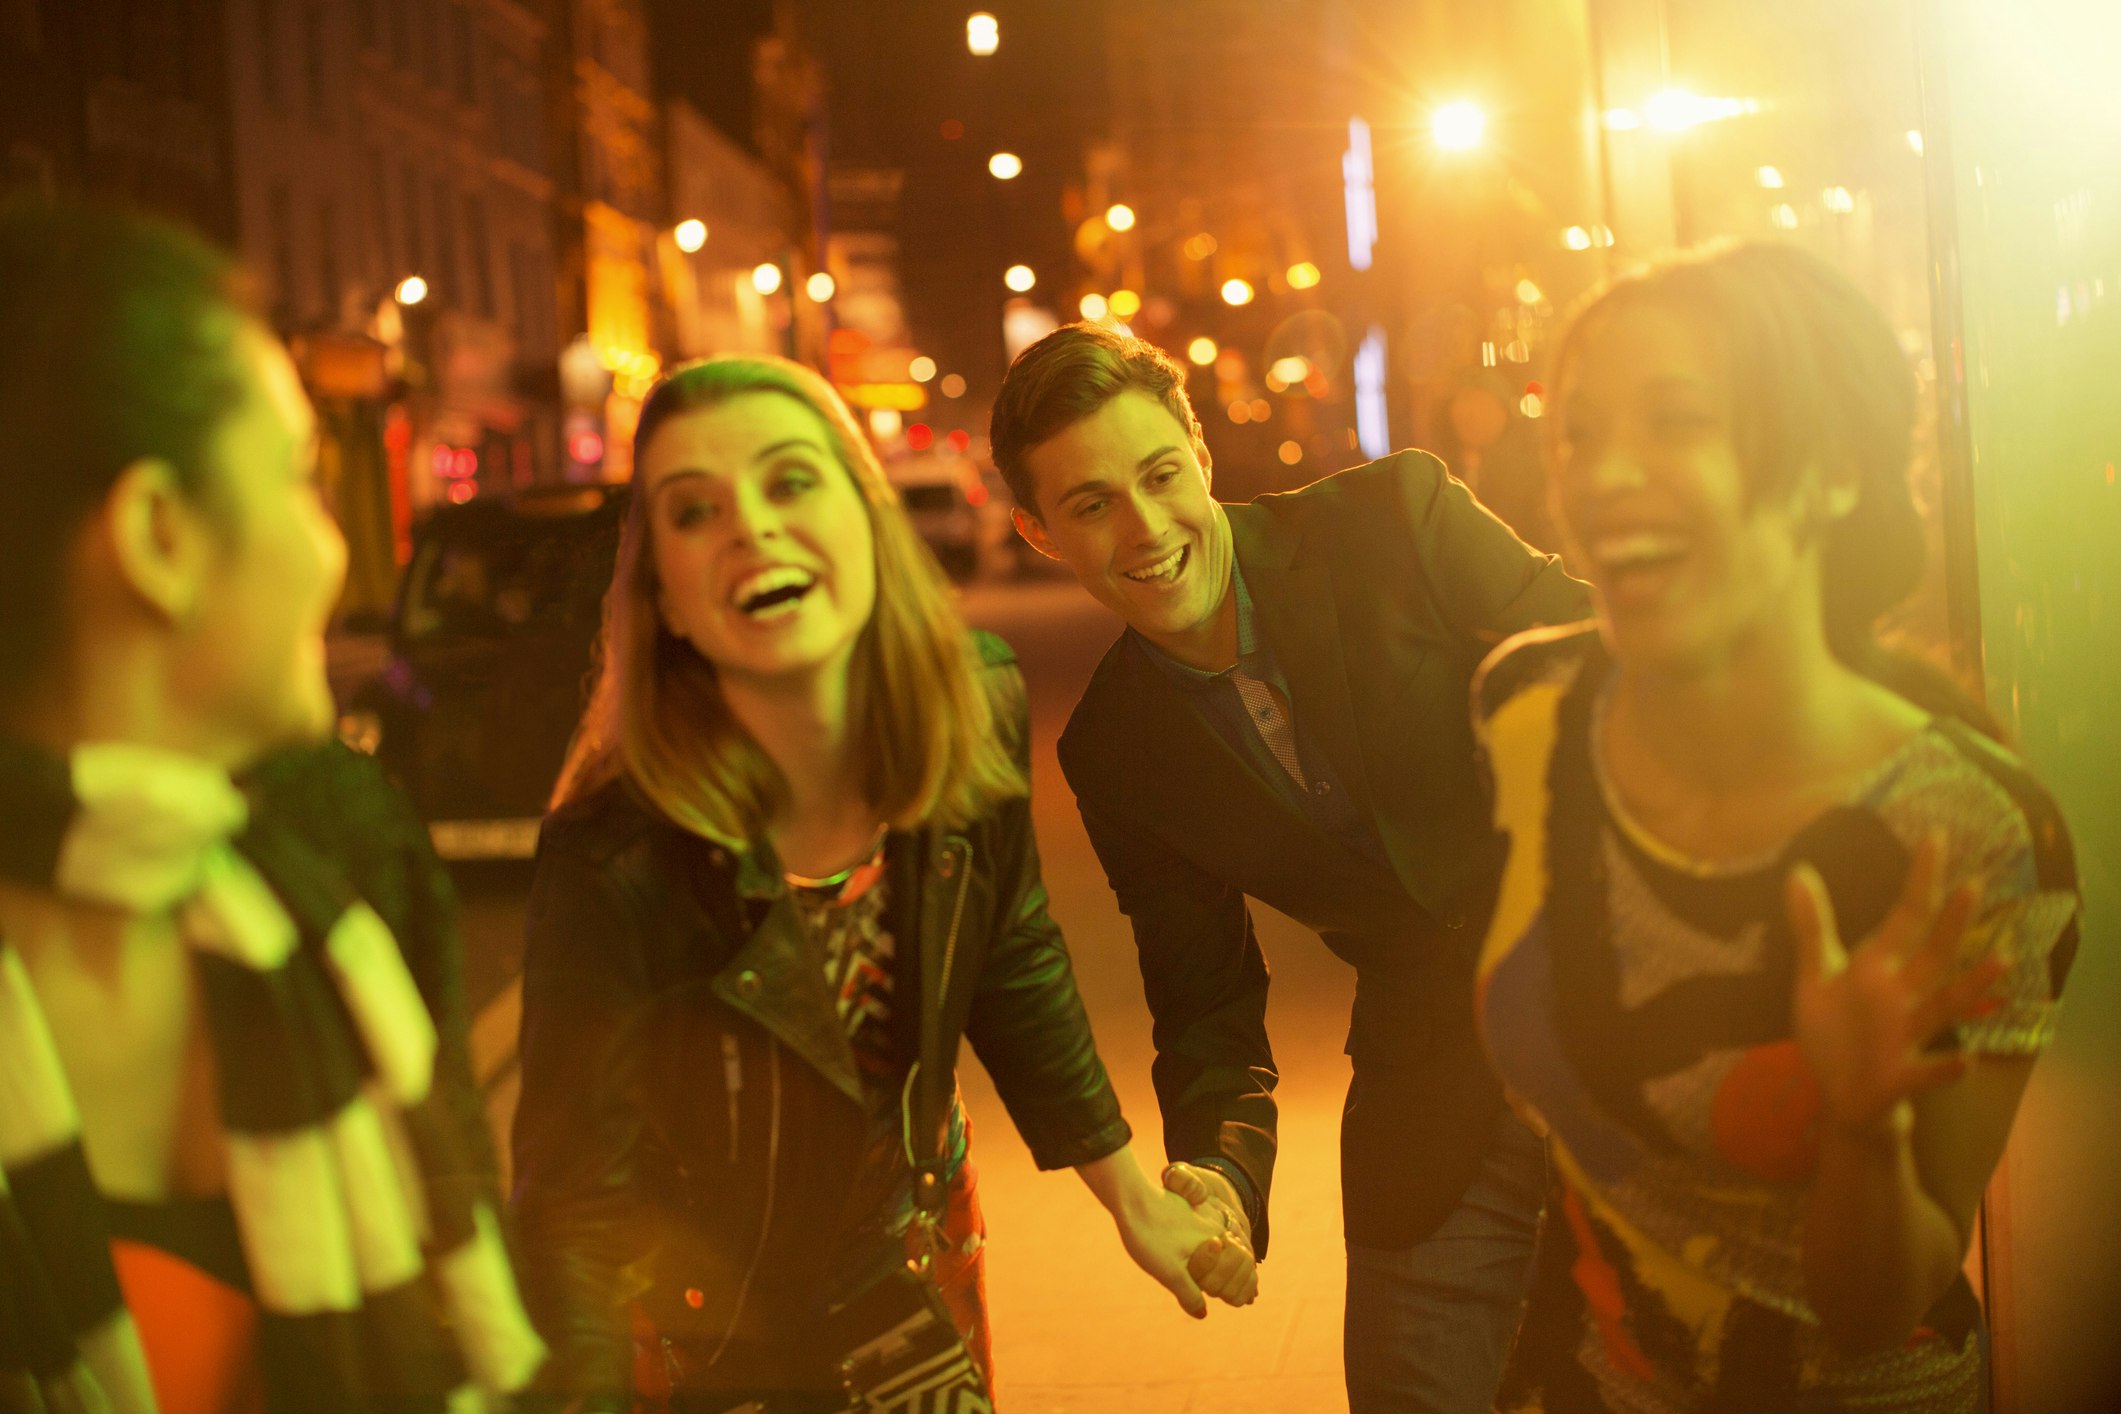 Friends walking down city street together at night 